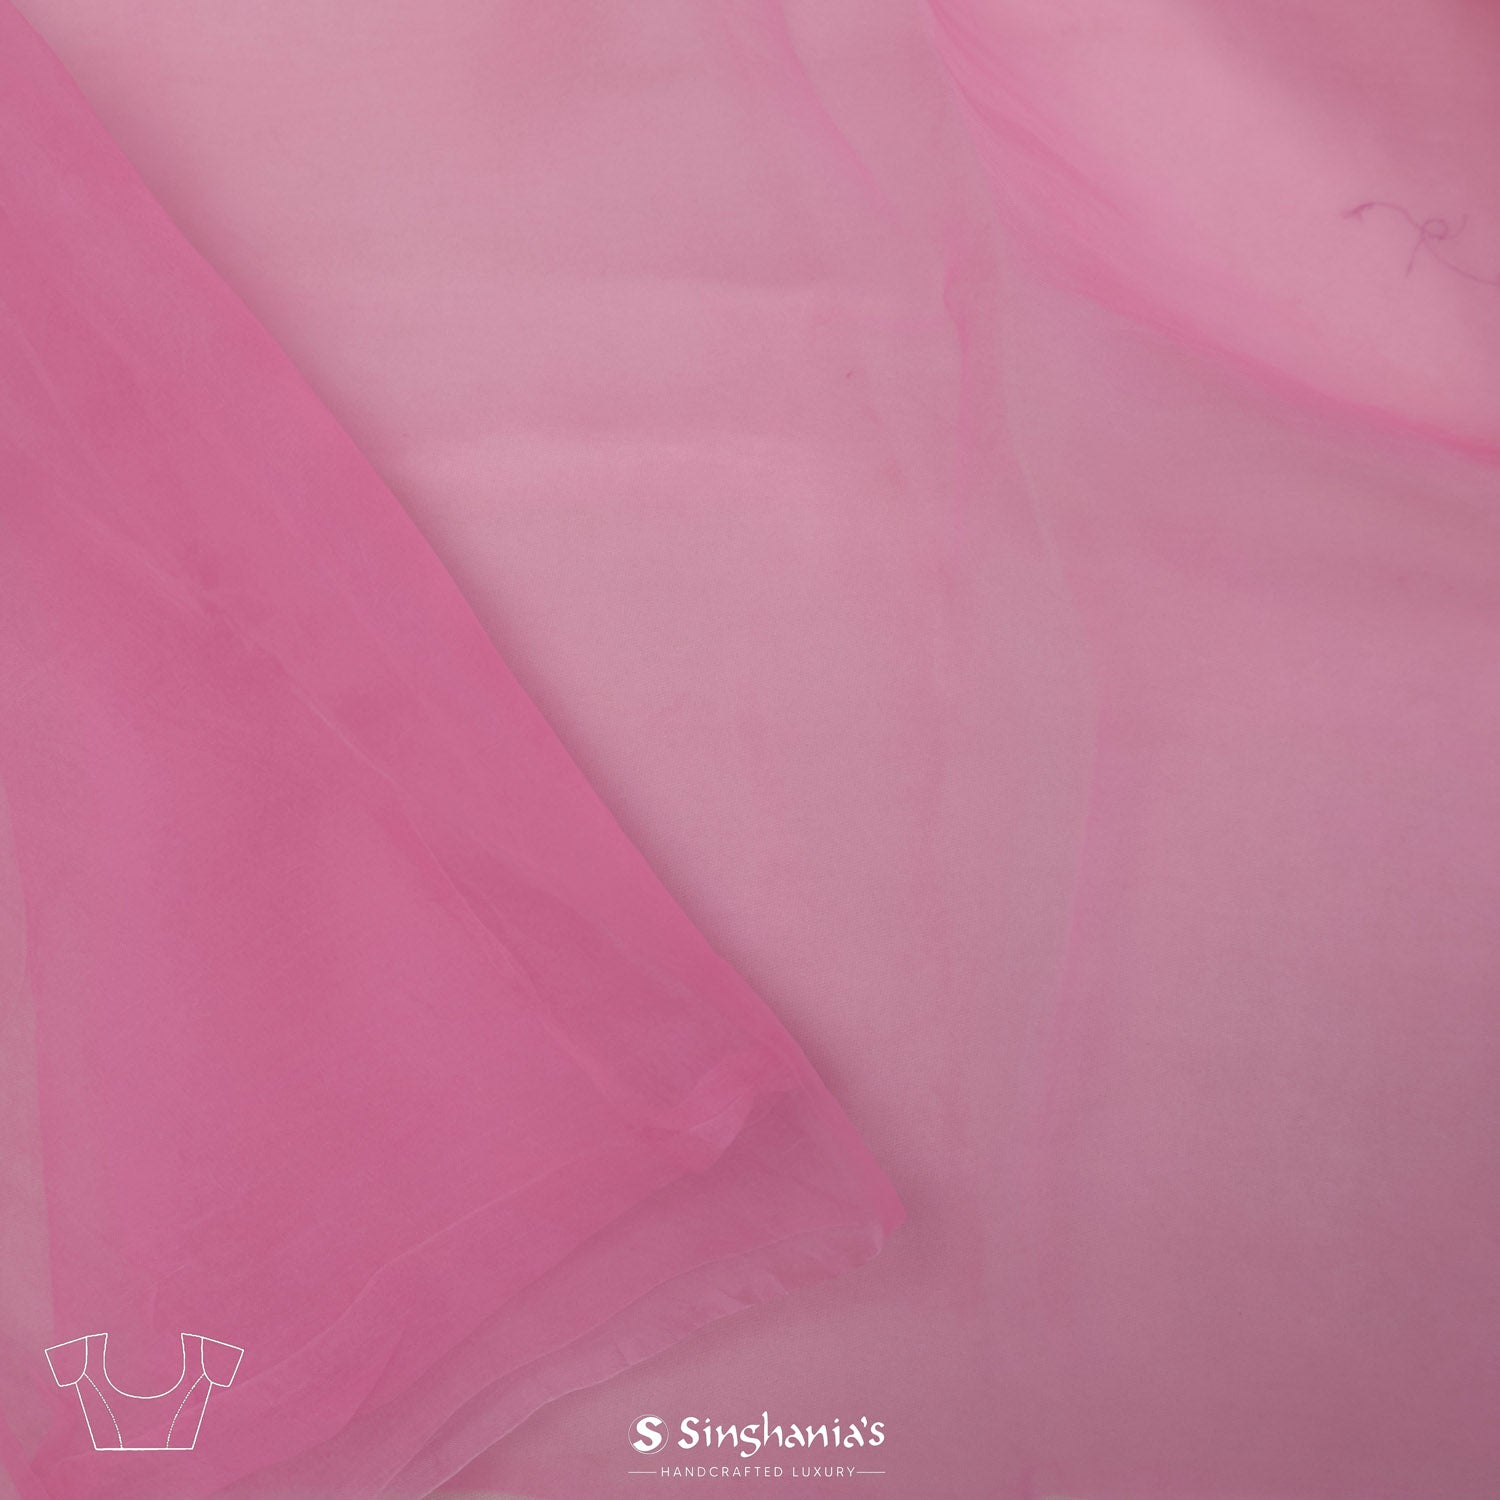 Carnation Pink Organza Saree With Hand Embroidery